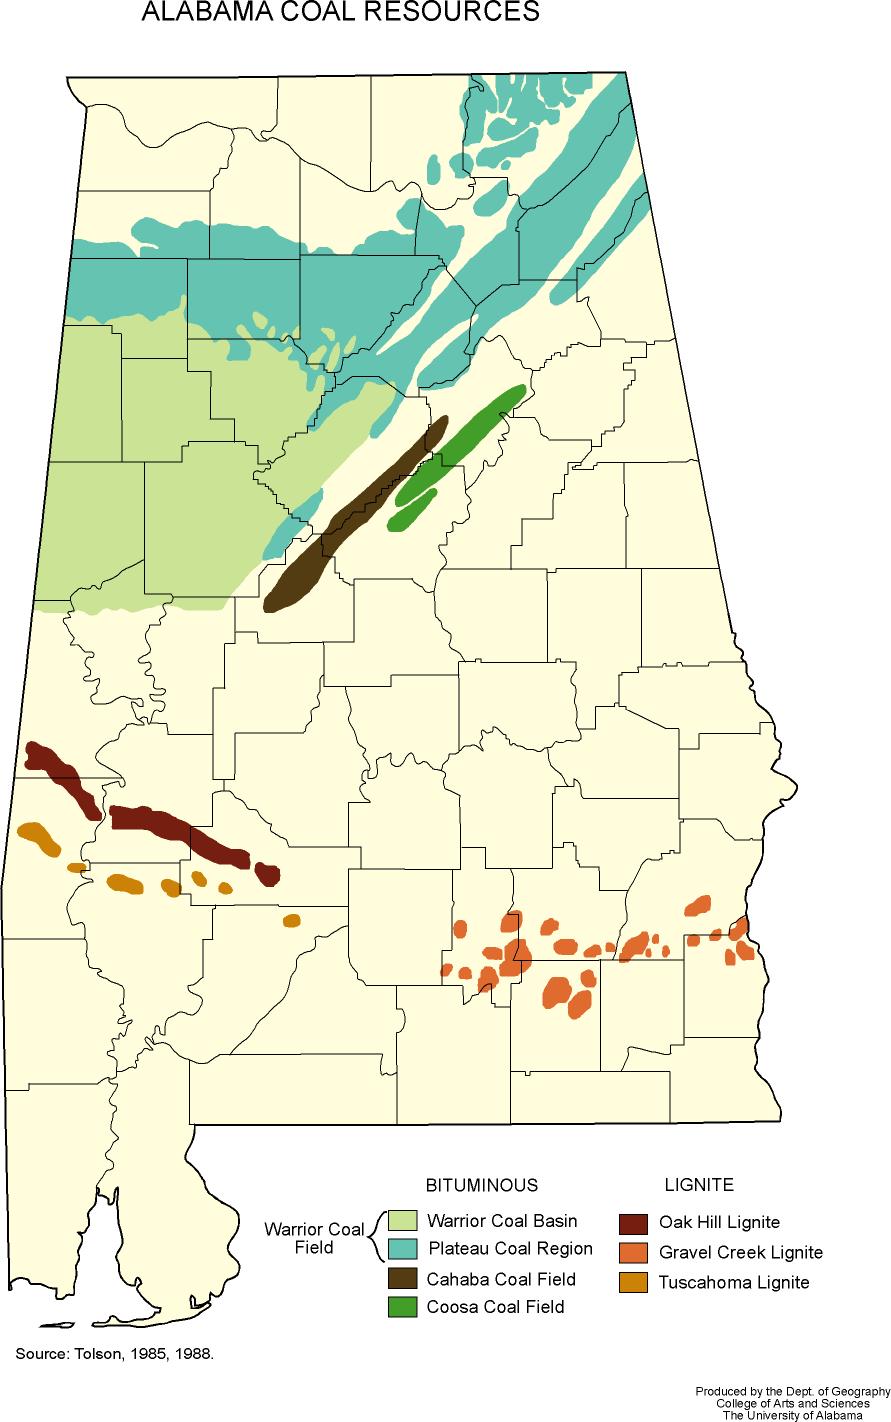 What are Alabama's natural resources?